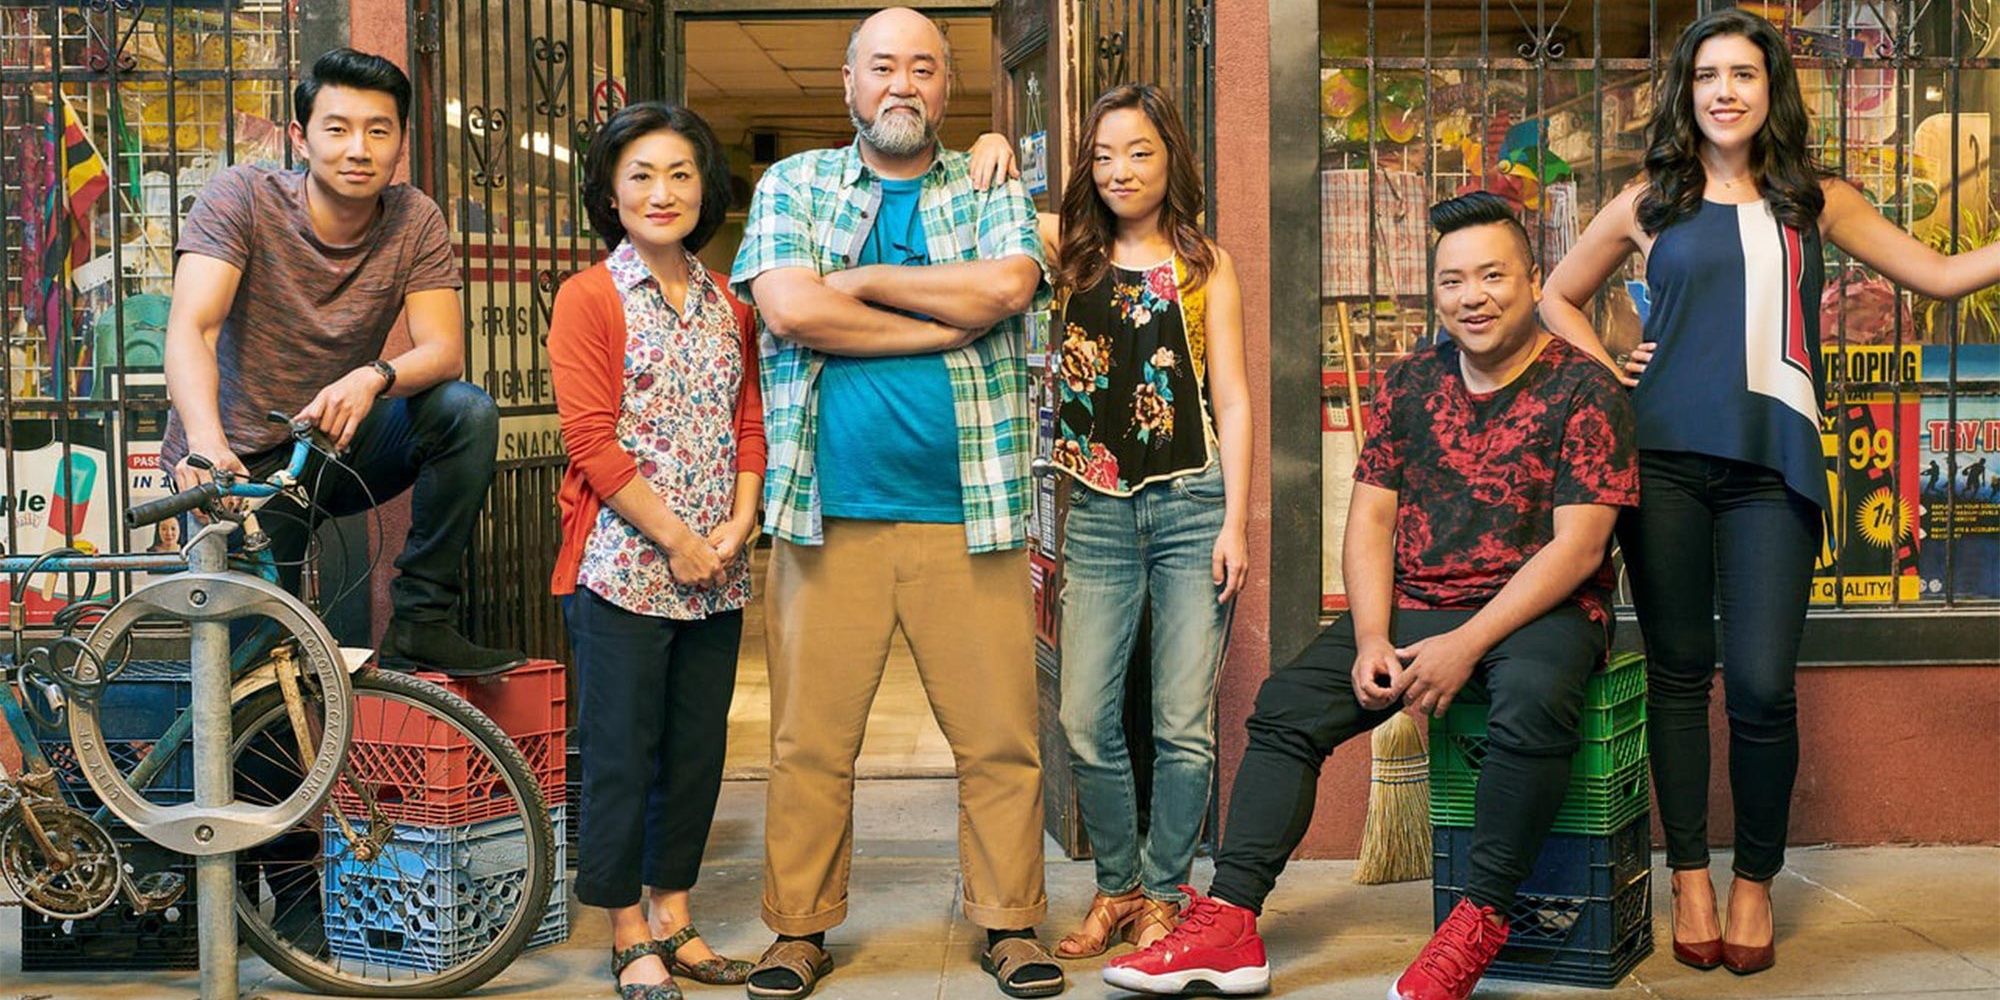 The cast of Kims Convenience stands in front of a store.